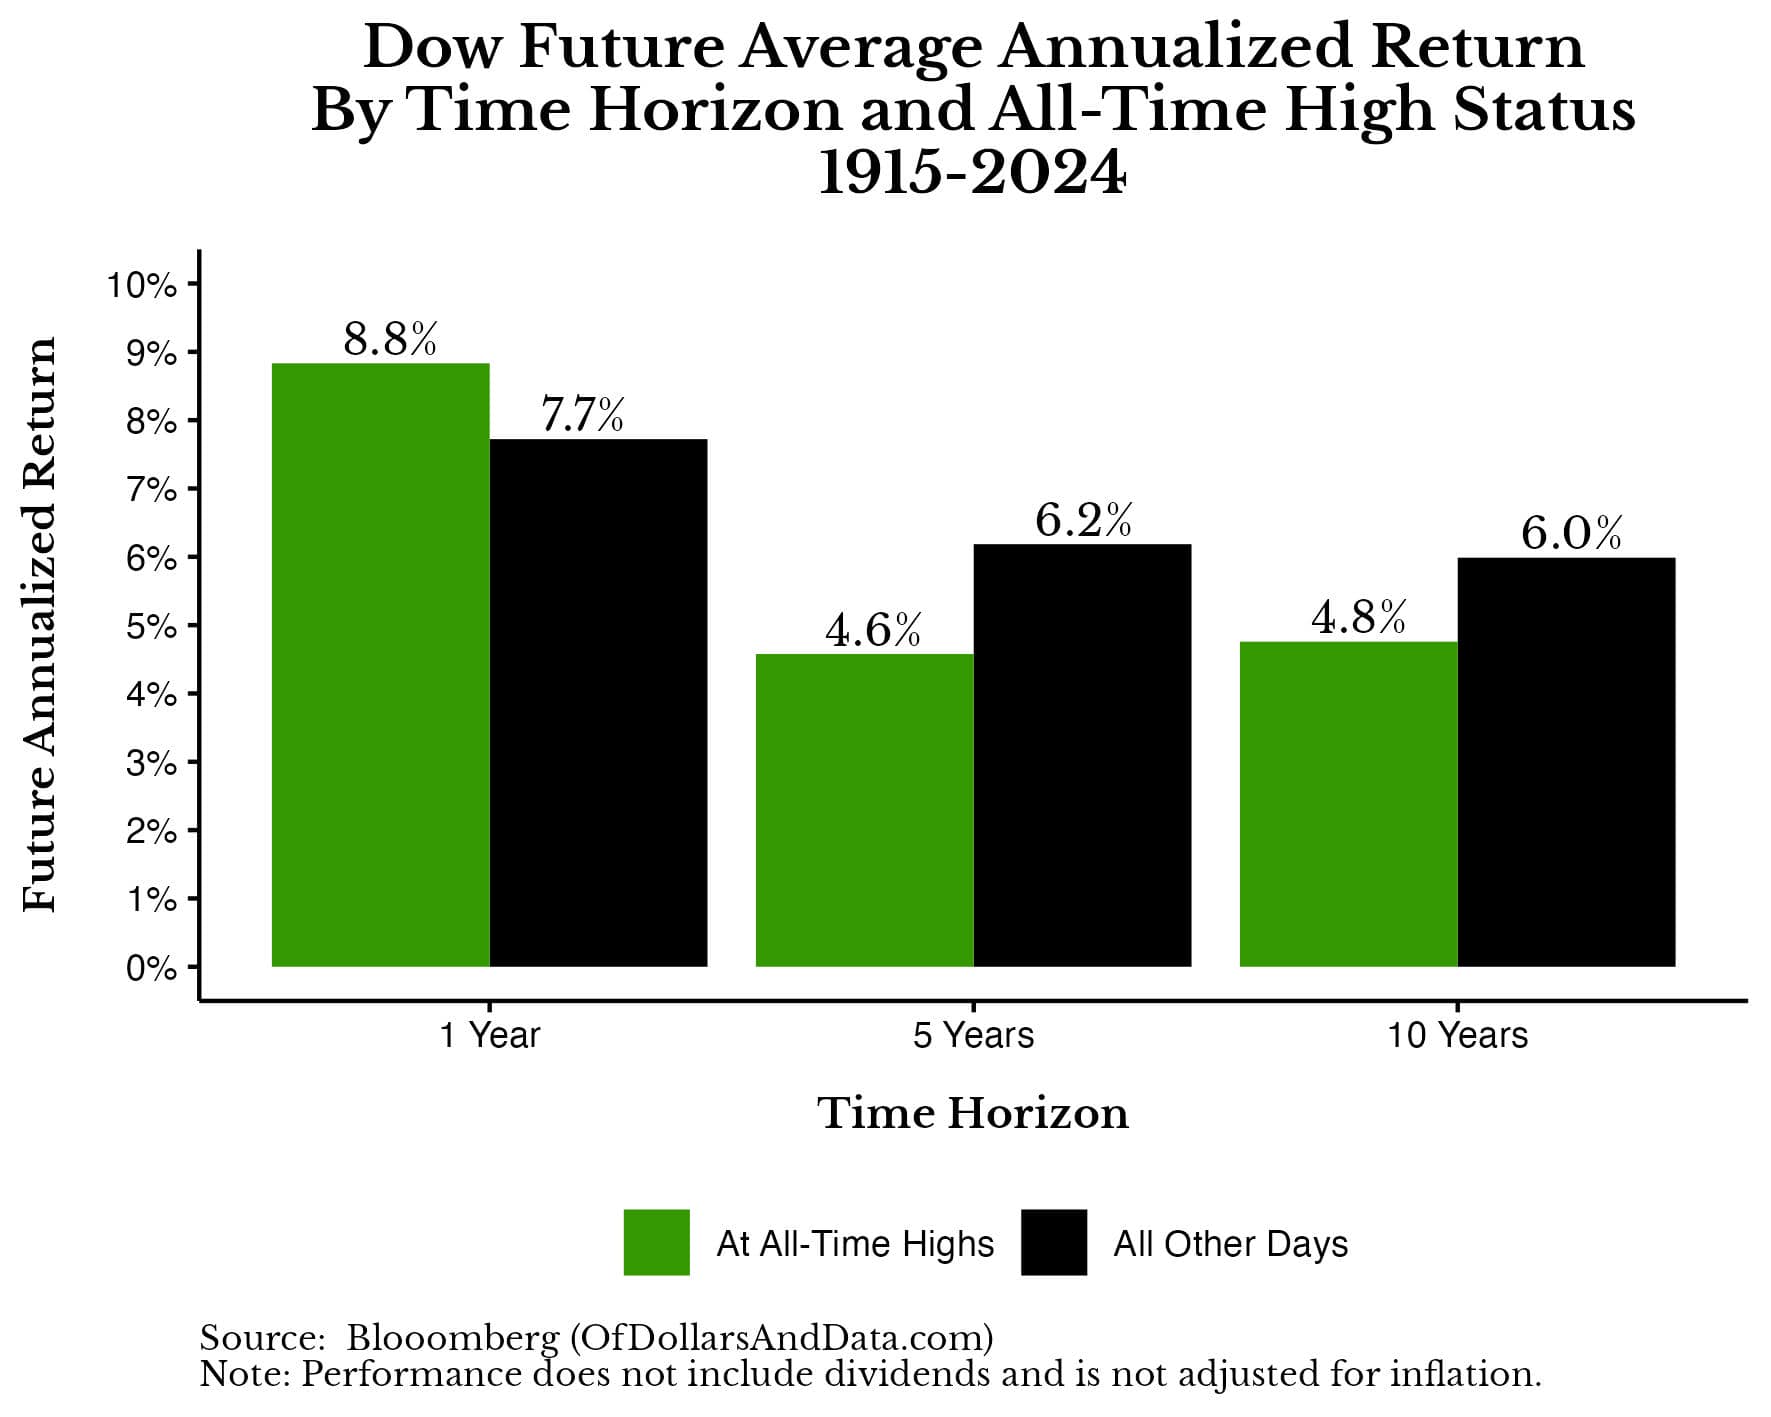 Dow future annualized return by time horizon and all-time high status from 1915-2024.